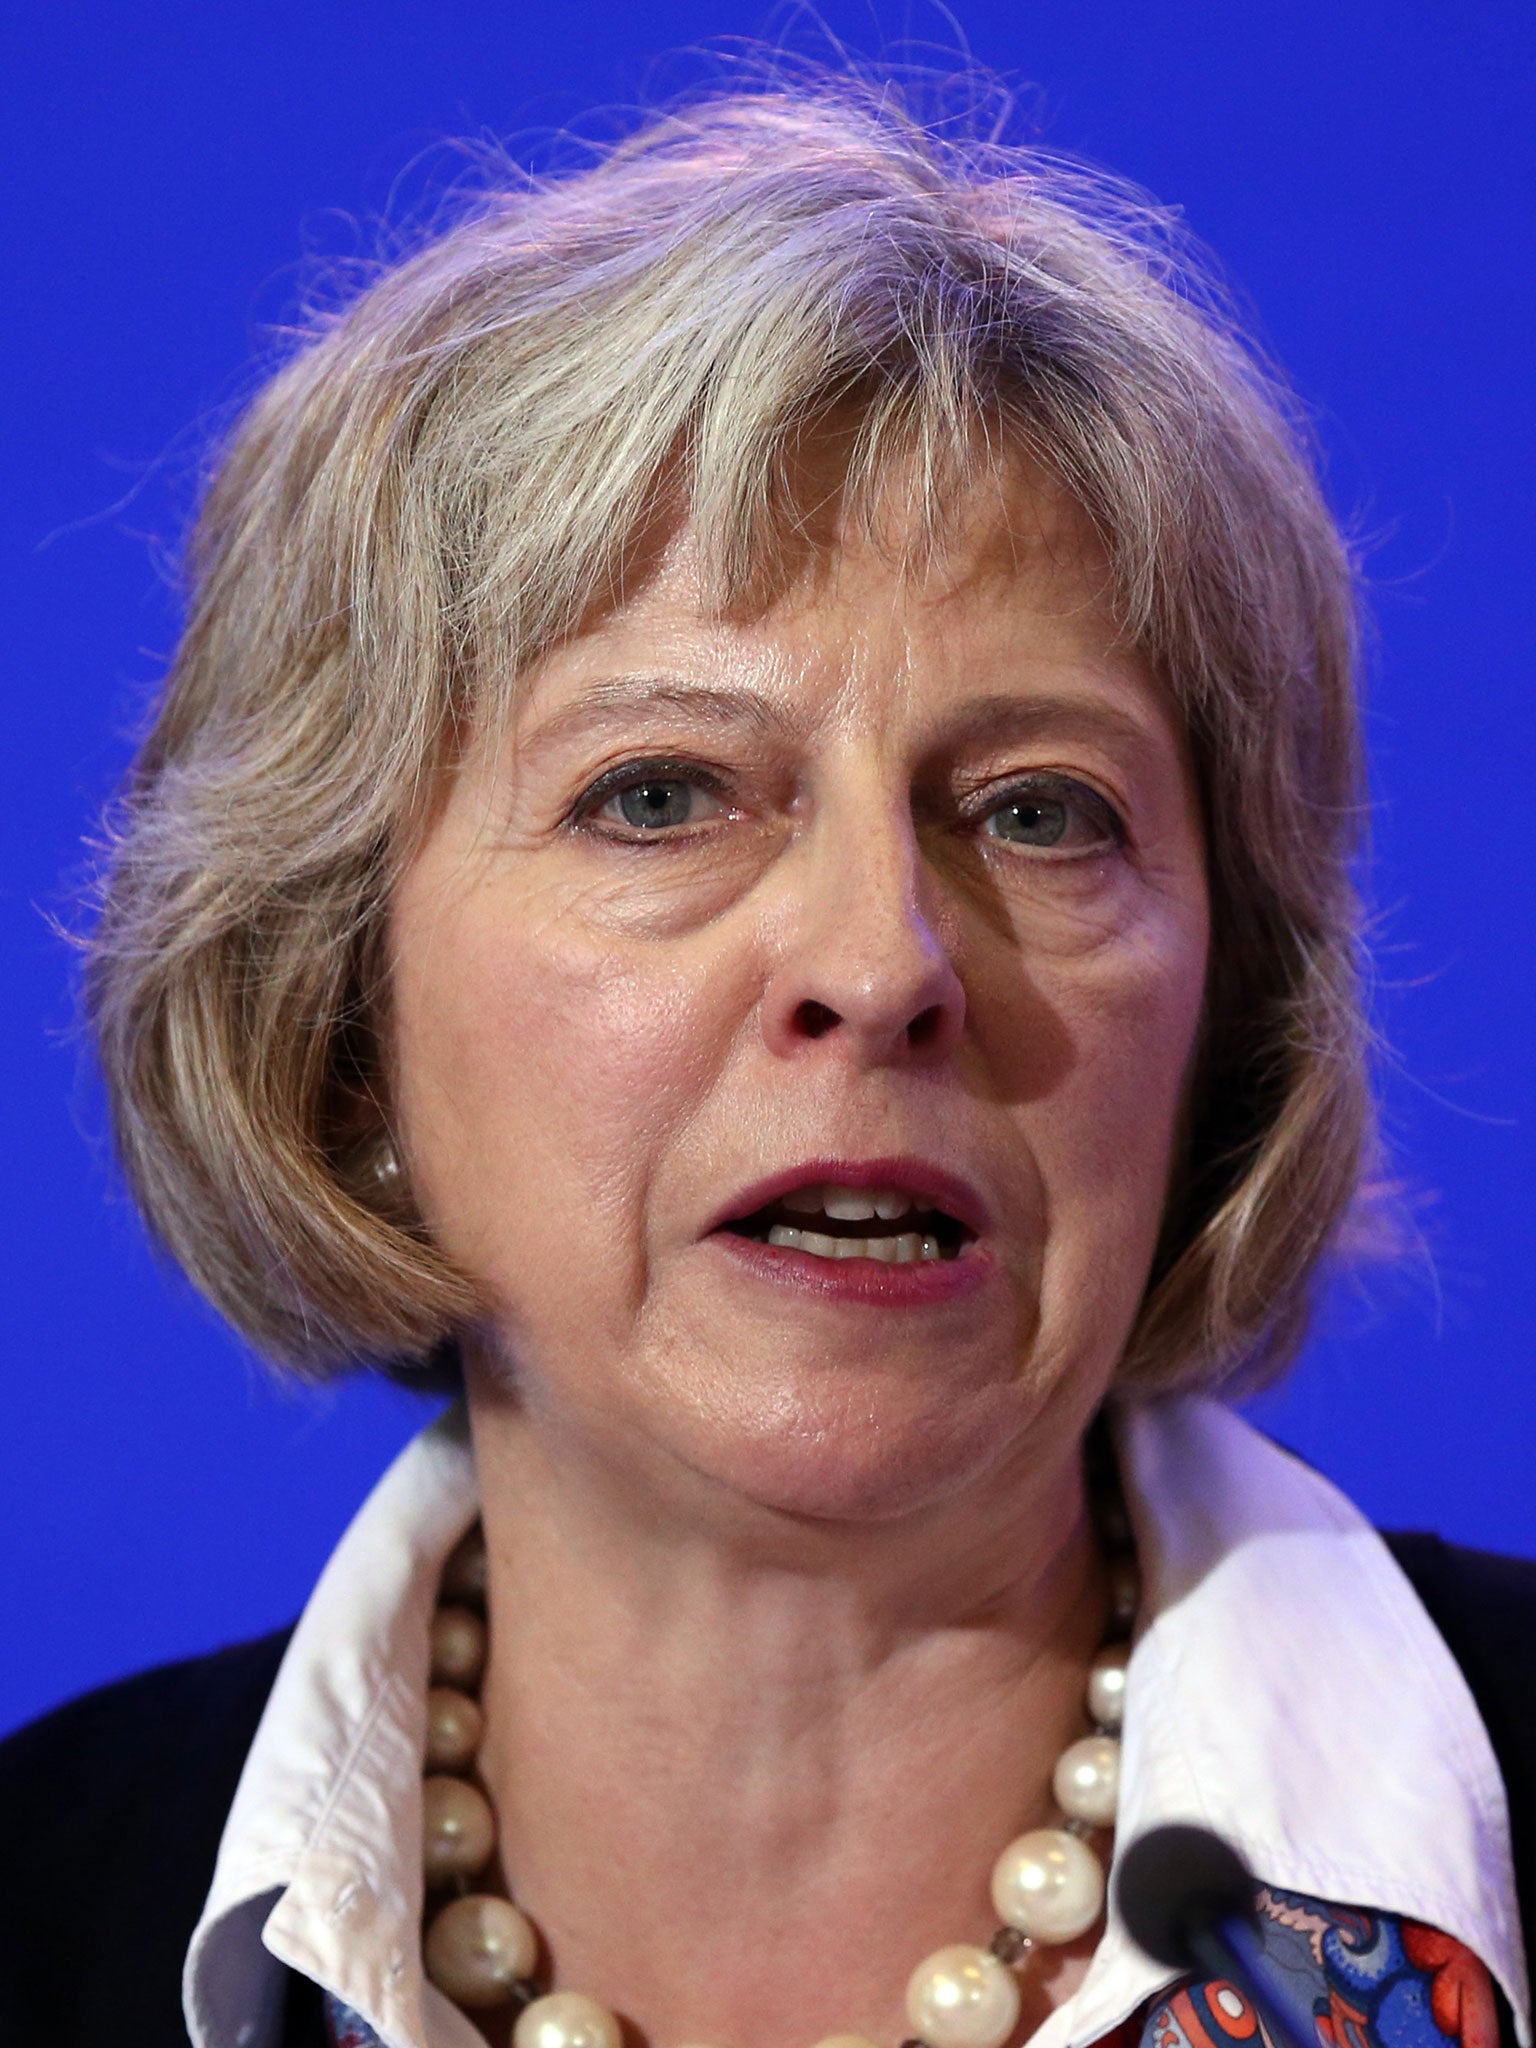 Theresa May said she wanted to reinstate the original idea of free movement within the EU